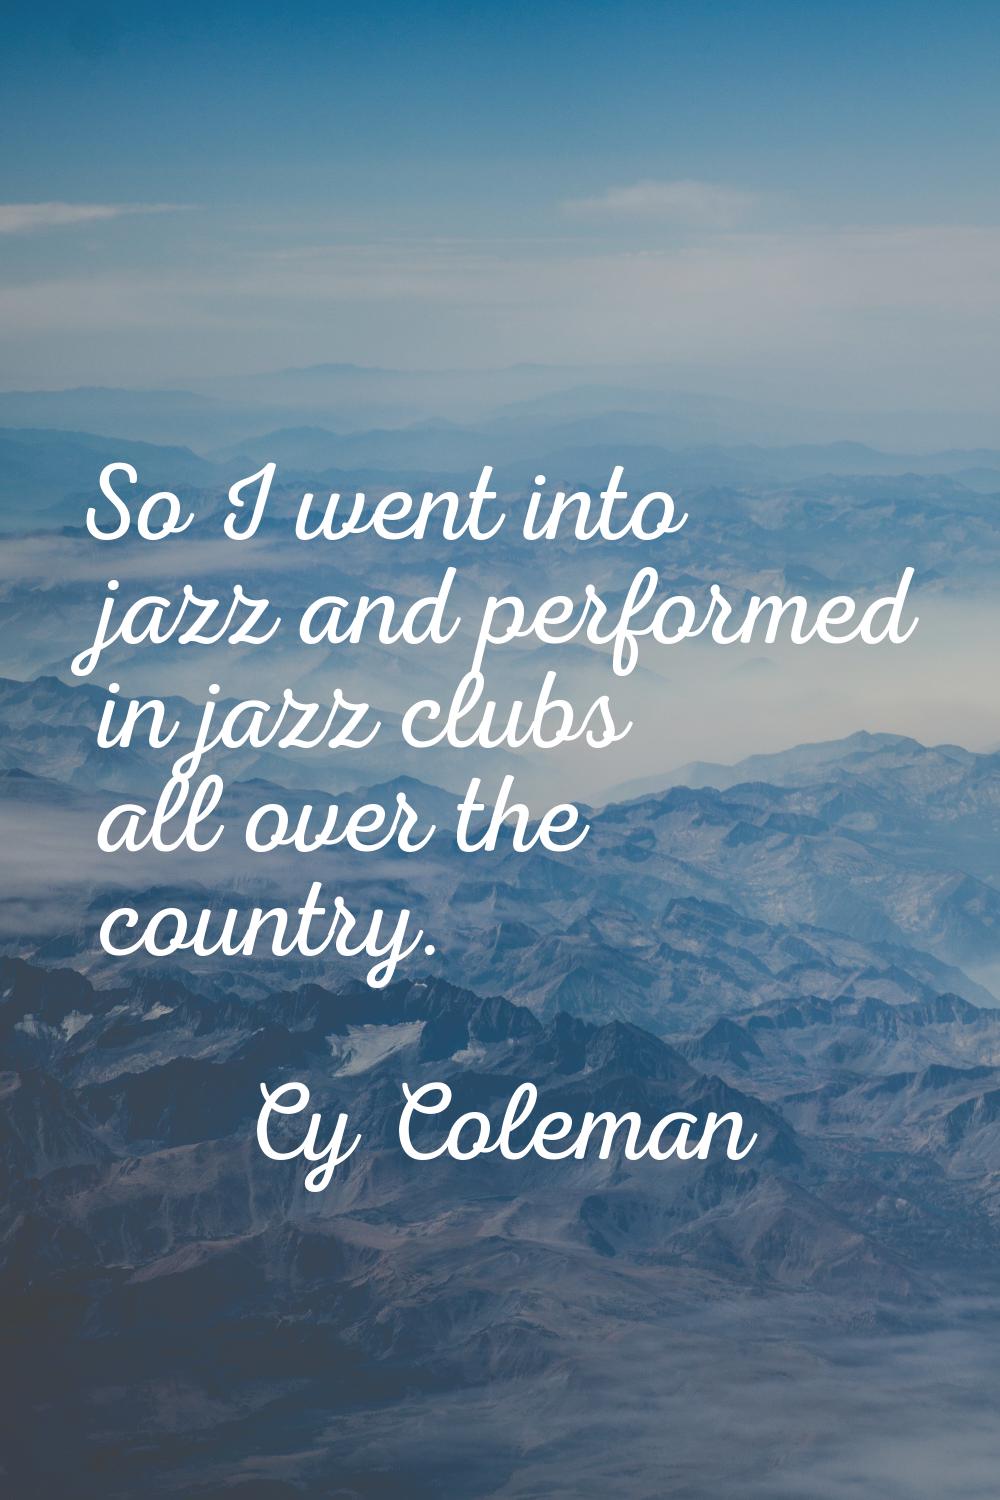 So I went into jazz and performed in jazz clubs all over the country.